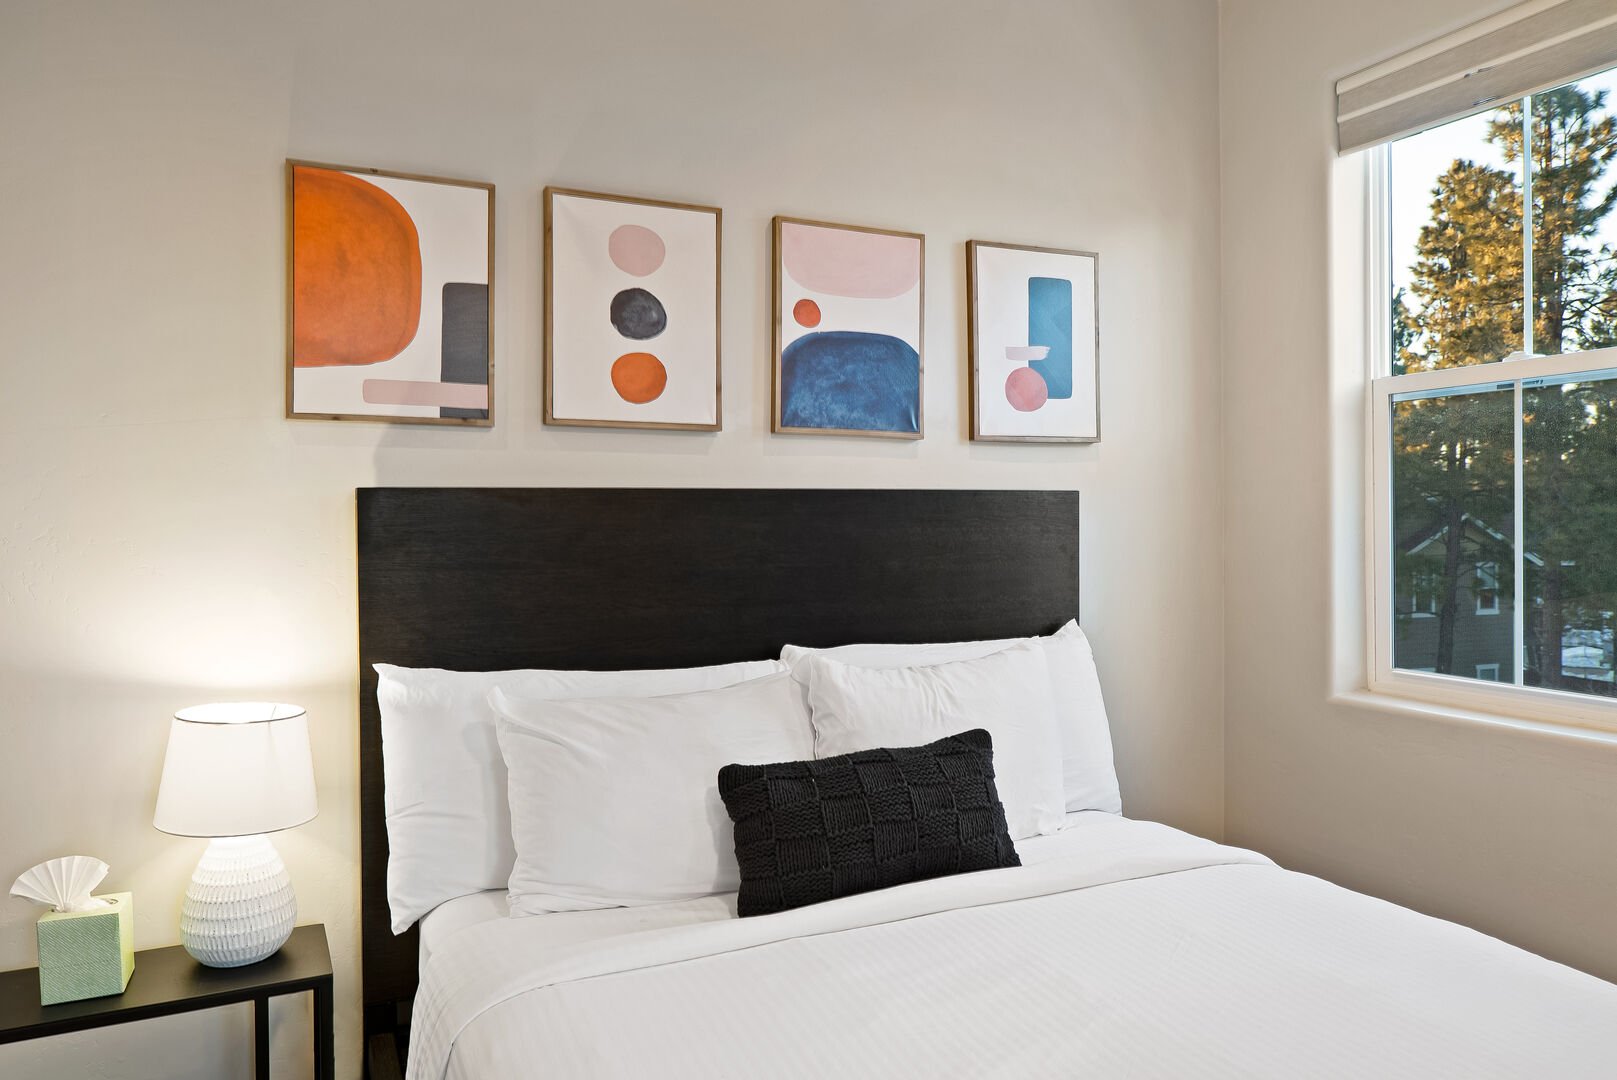 Geometric shapes and comfort in this upstairs guest bedroom.